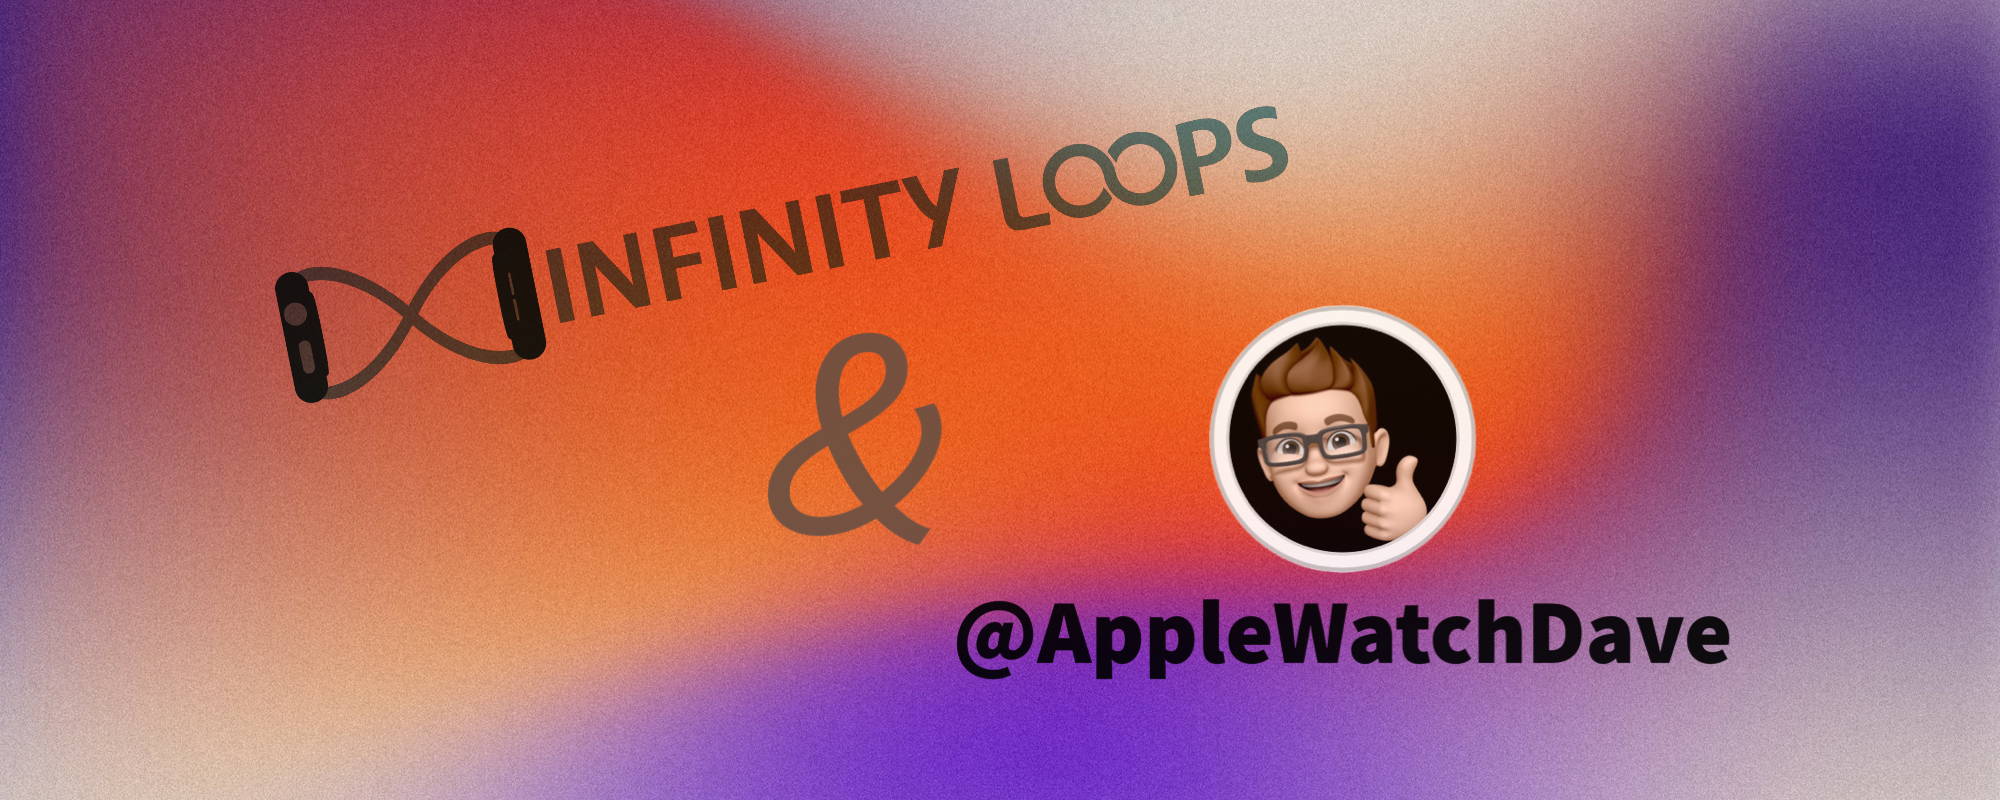 Infinity Loops and Apple Watch Dave Collaberation